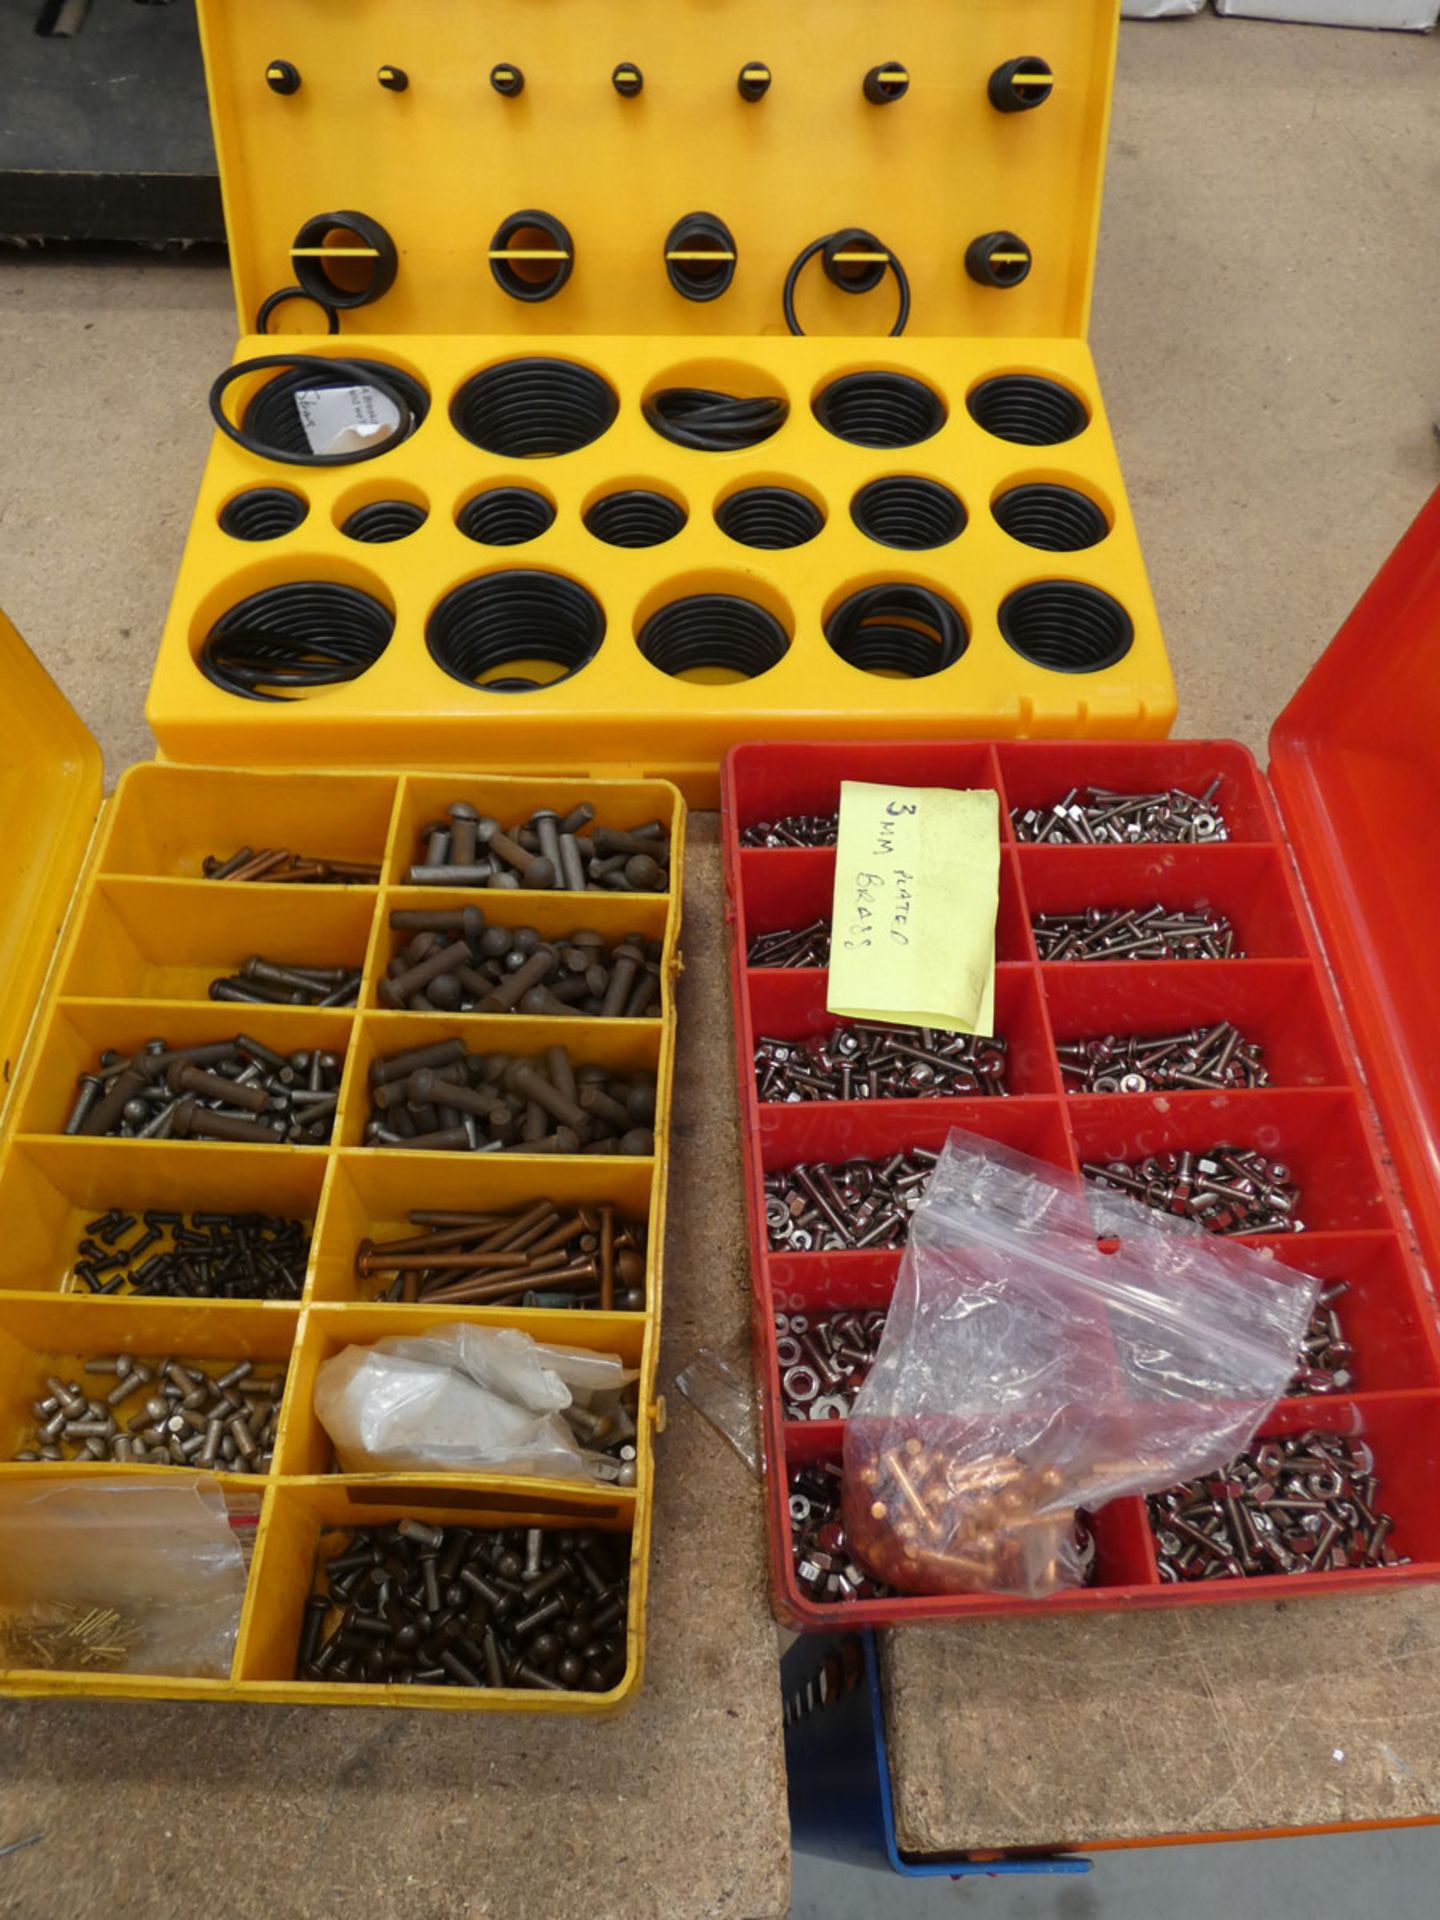 4580 - 'O' rings, screws, washers and pins